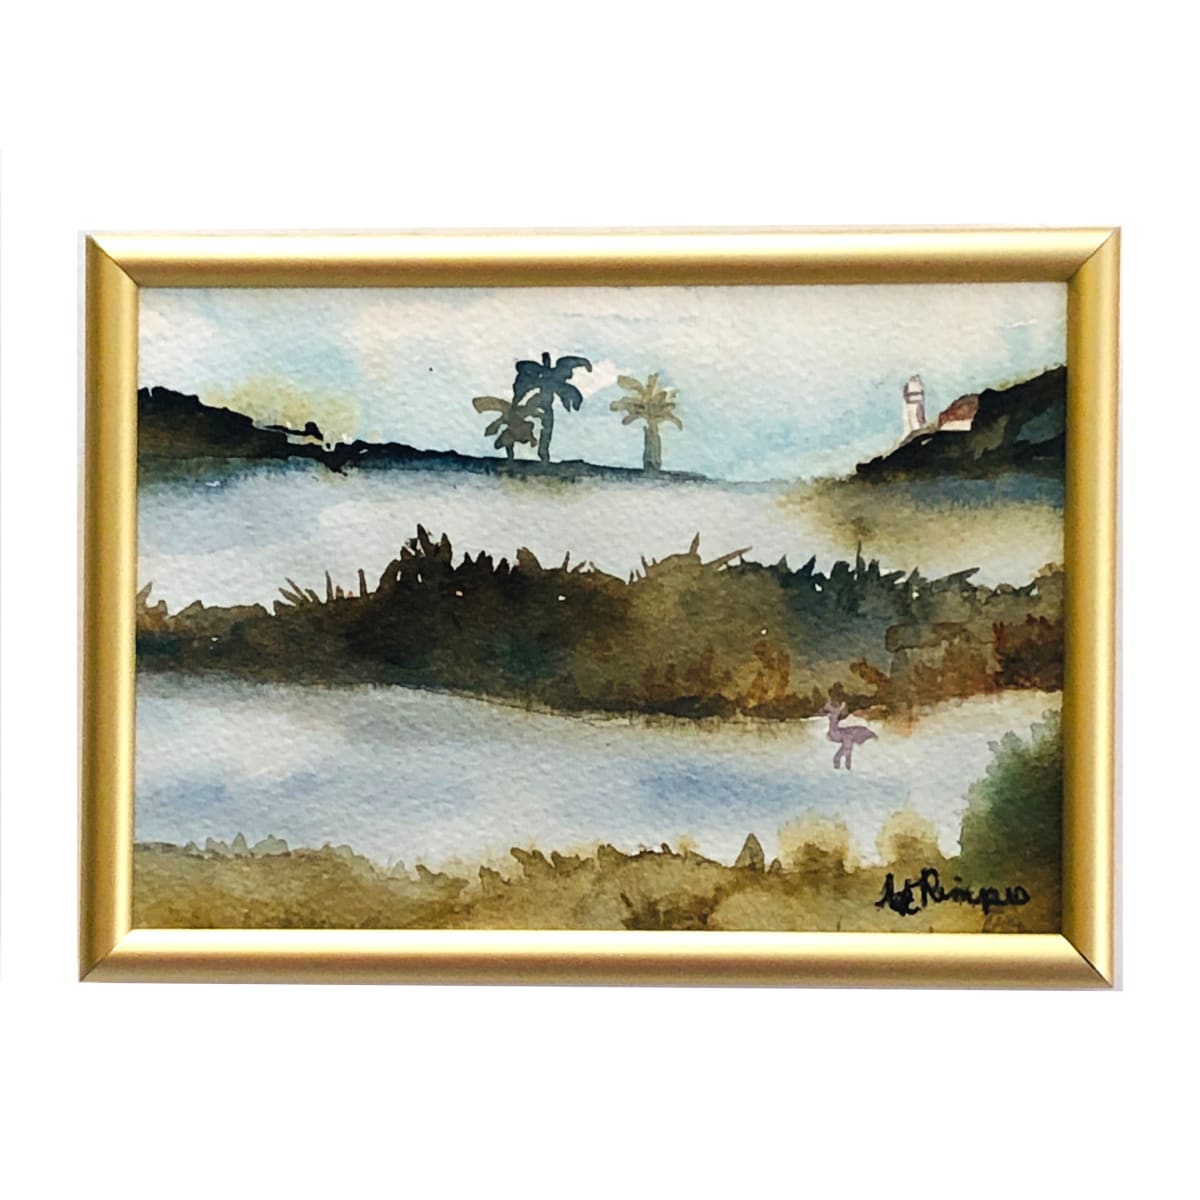 Wetland Wonders II by April Rimpo  Image: 5" X 7" painting in Frosted Gold low profile frame